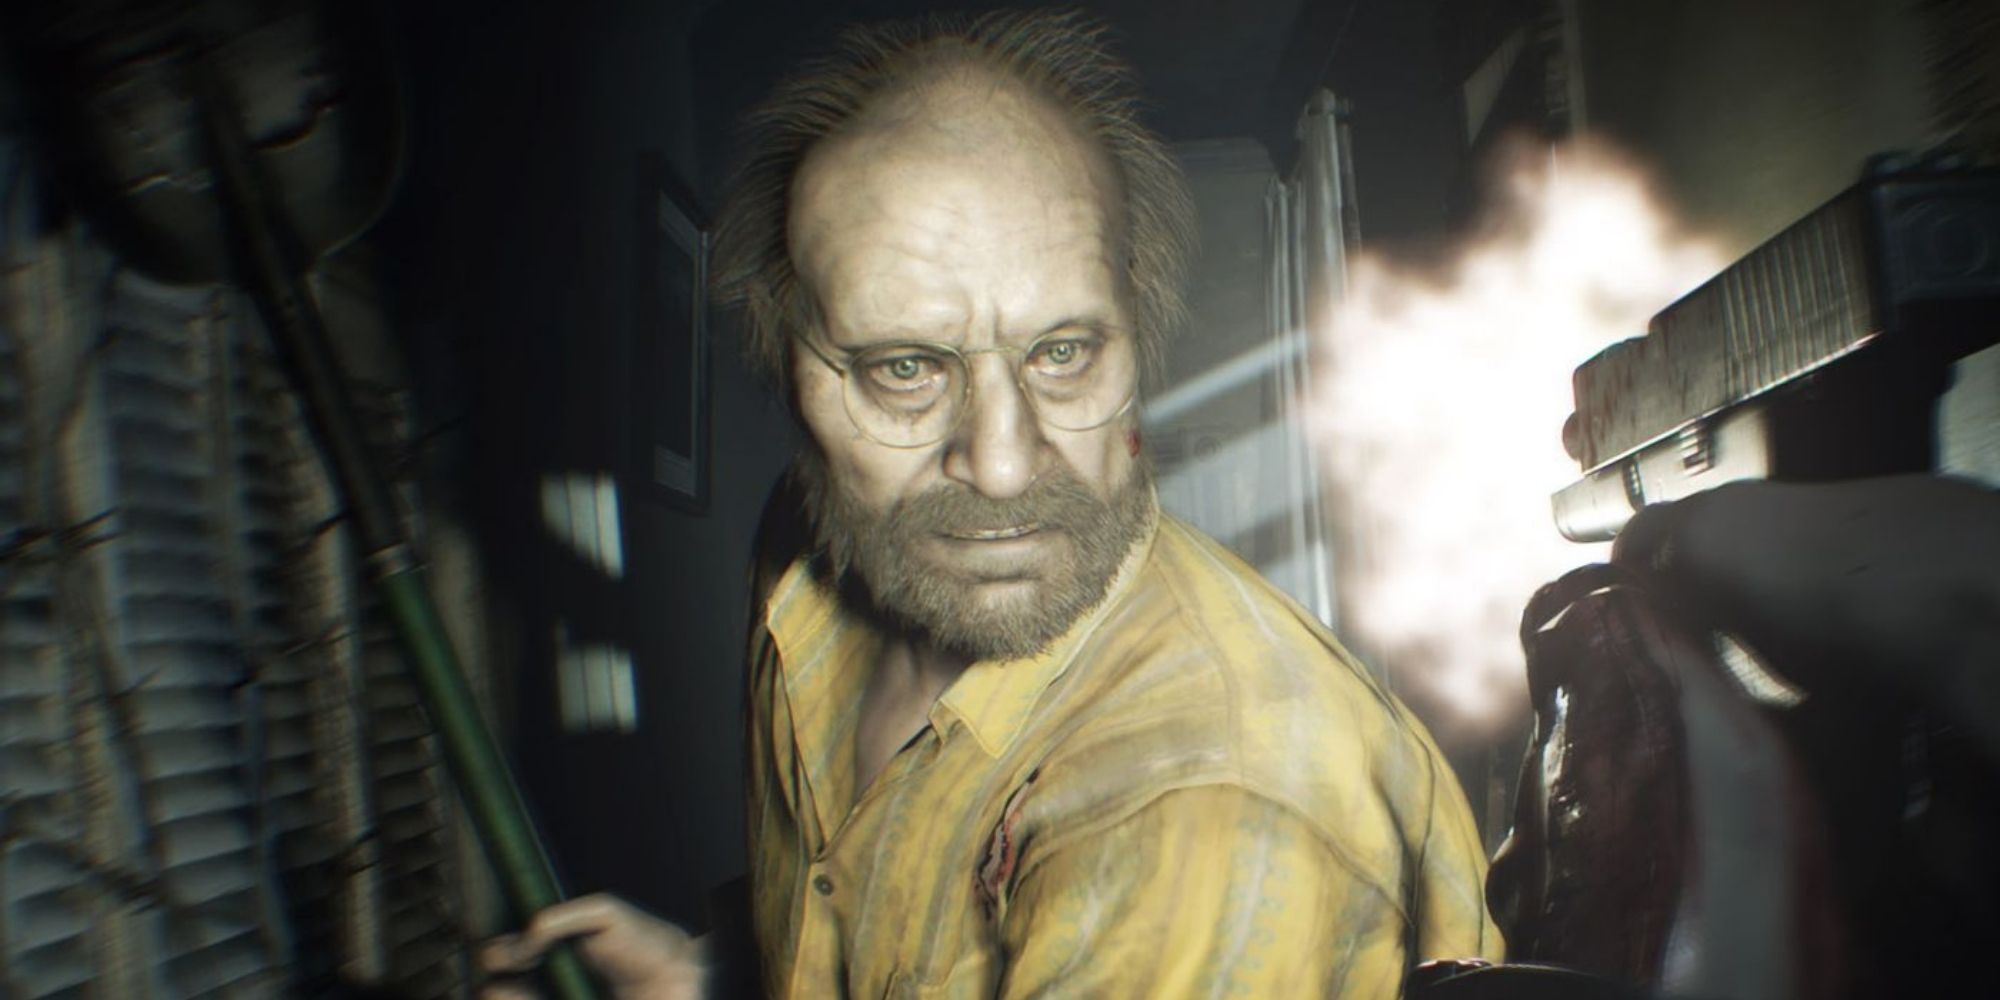 Resident Evil 7' could have been a live service game with microtransactions